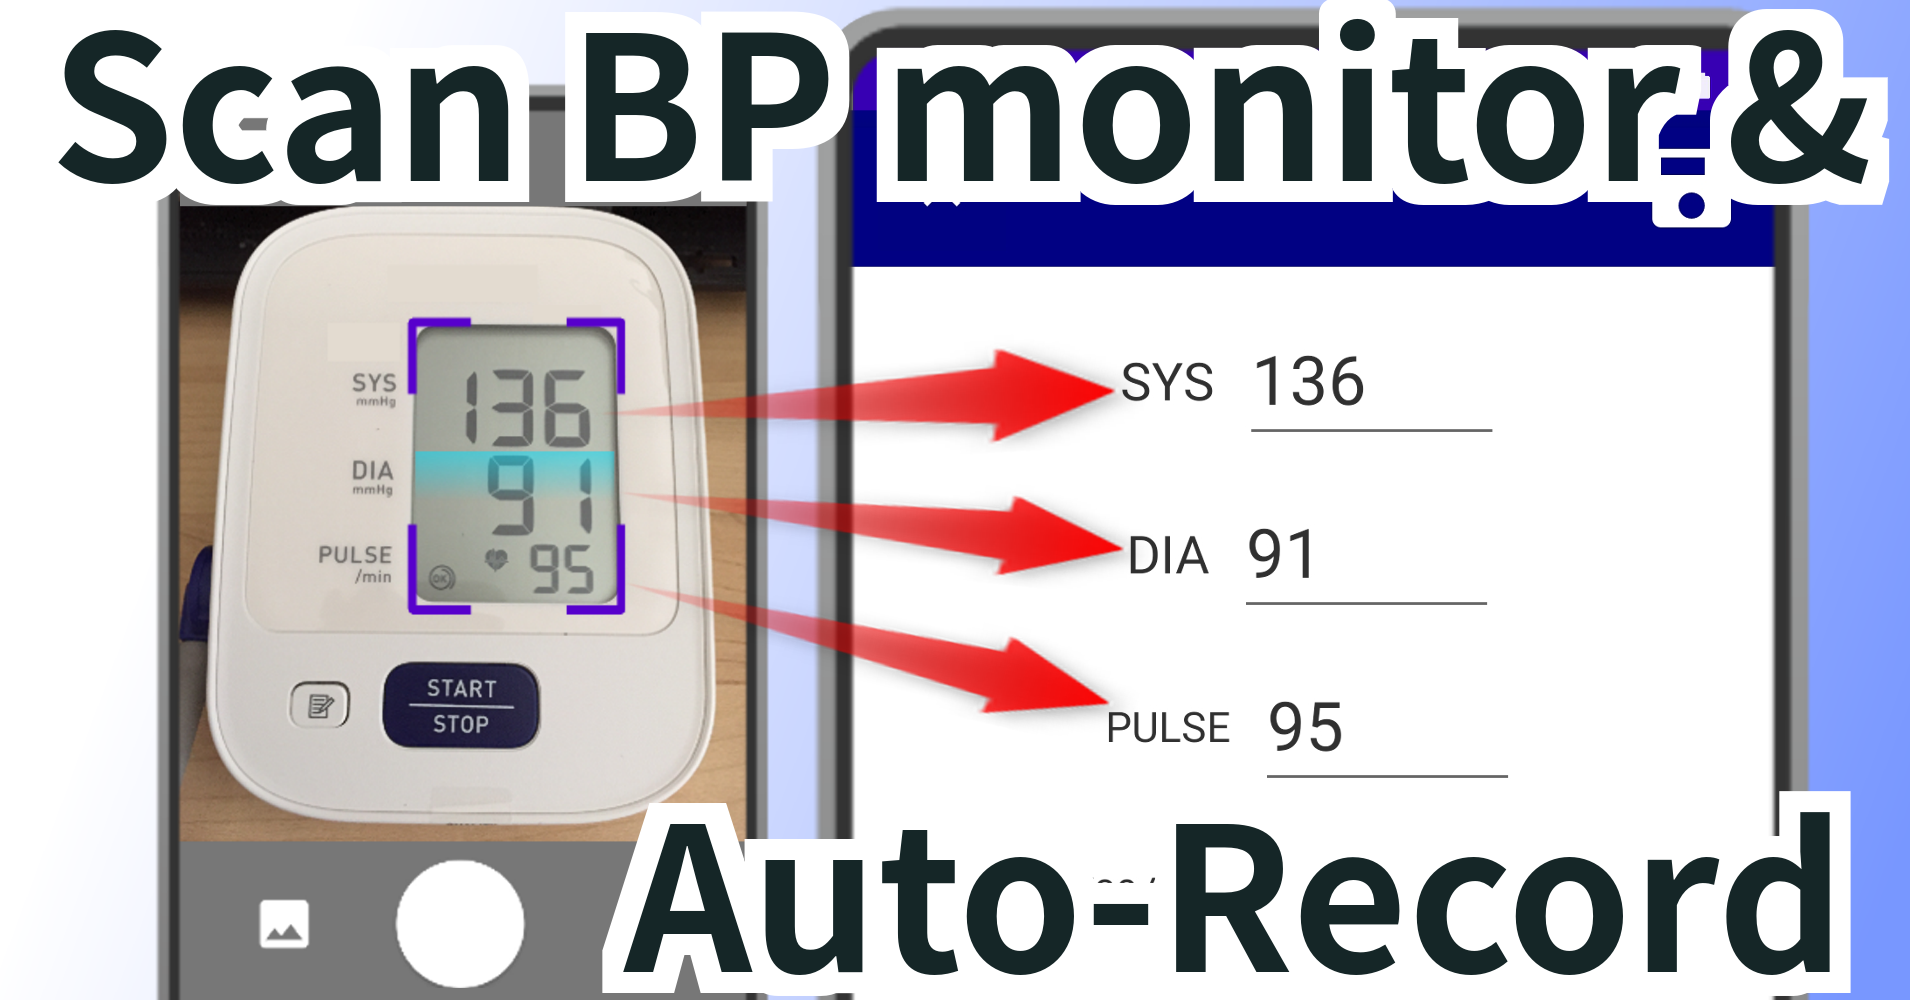 No smart BP monitor required. App scans monitor display & records for you.